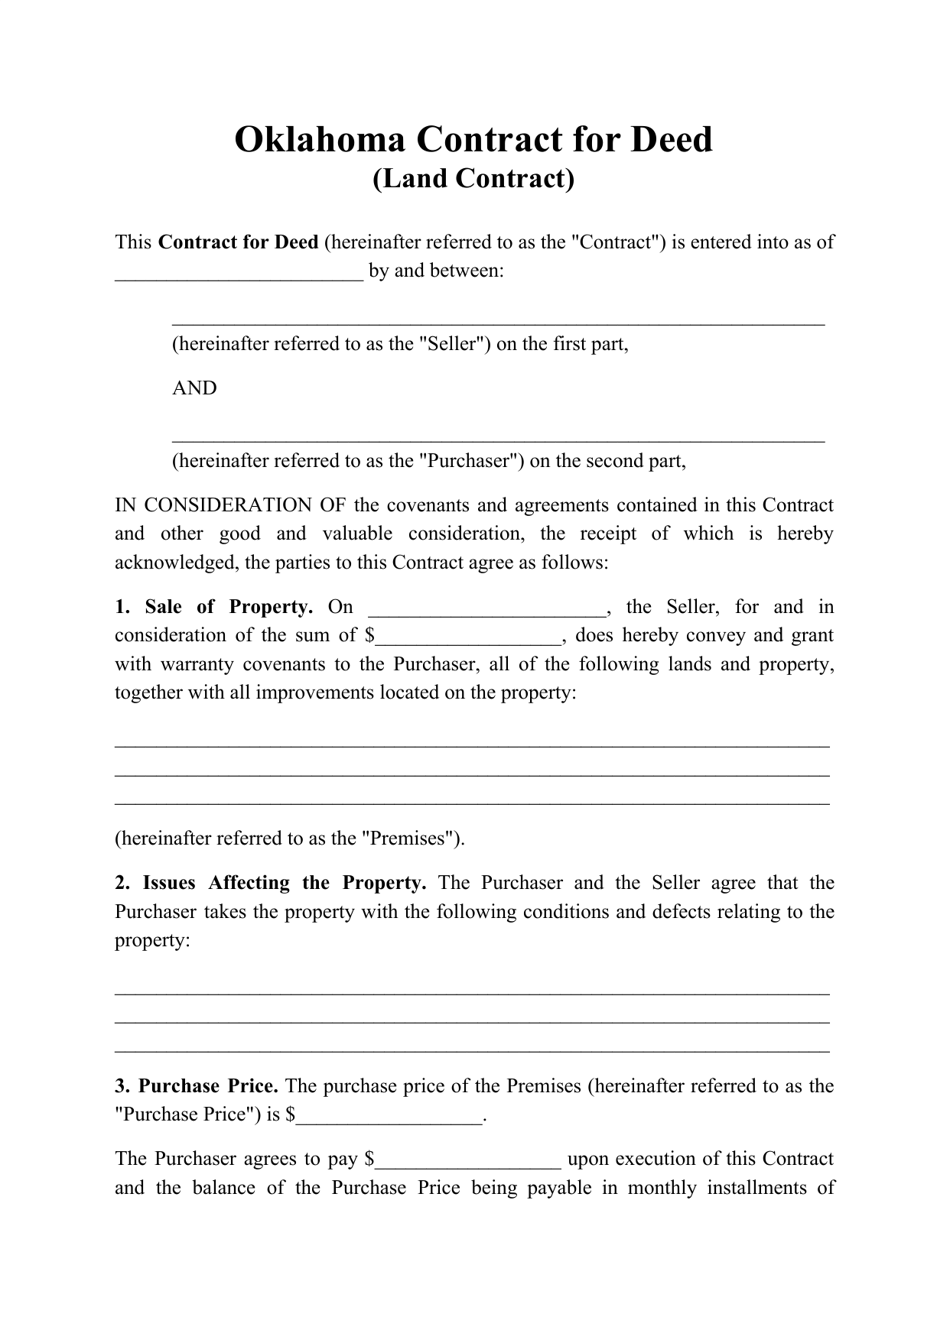 Contract for Deed (Land Contract) - Oklahoma, Page 1